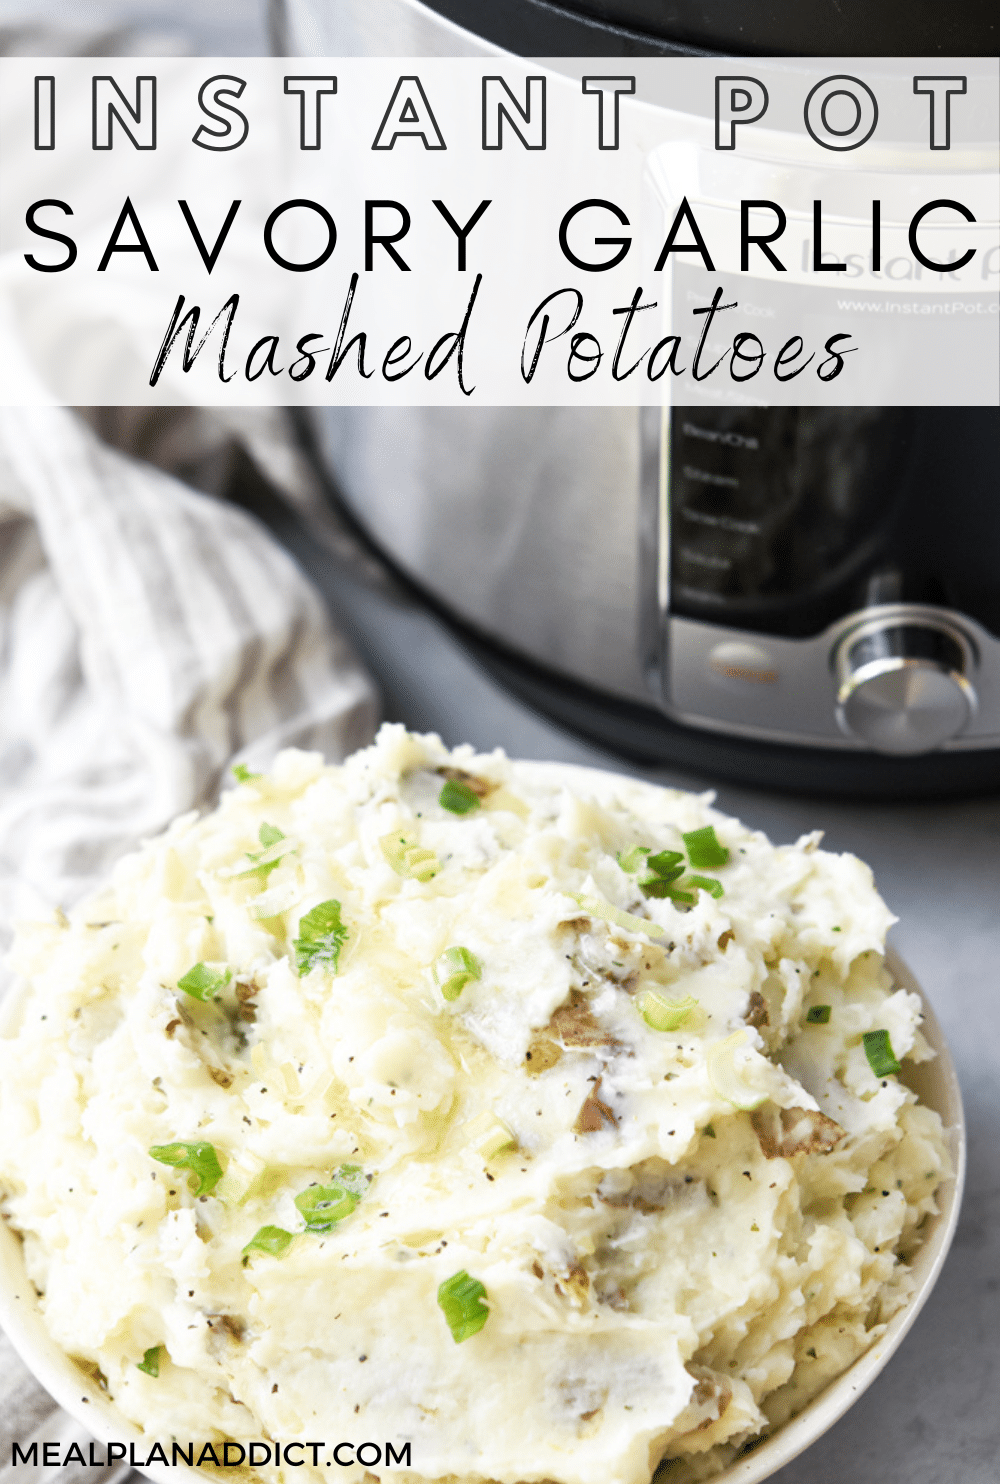 Mashed potatoes pin for Pinterest